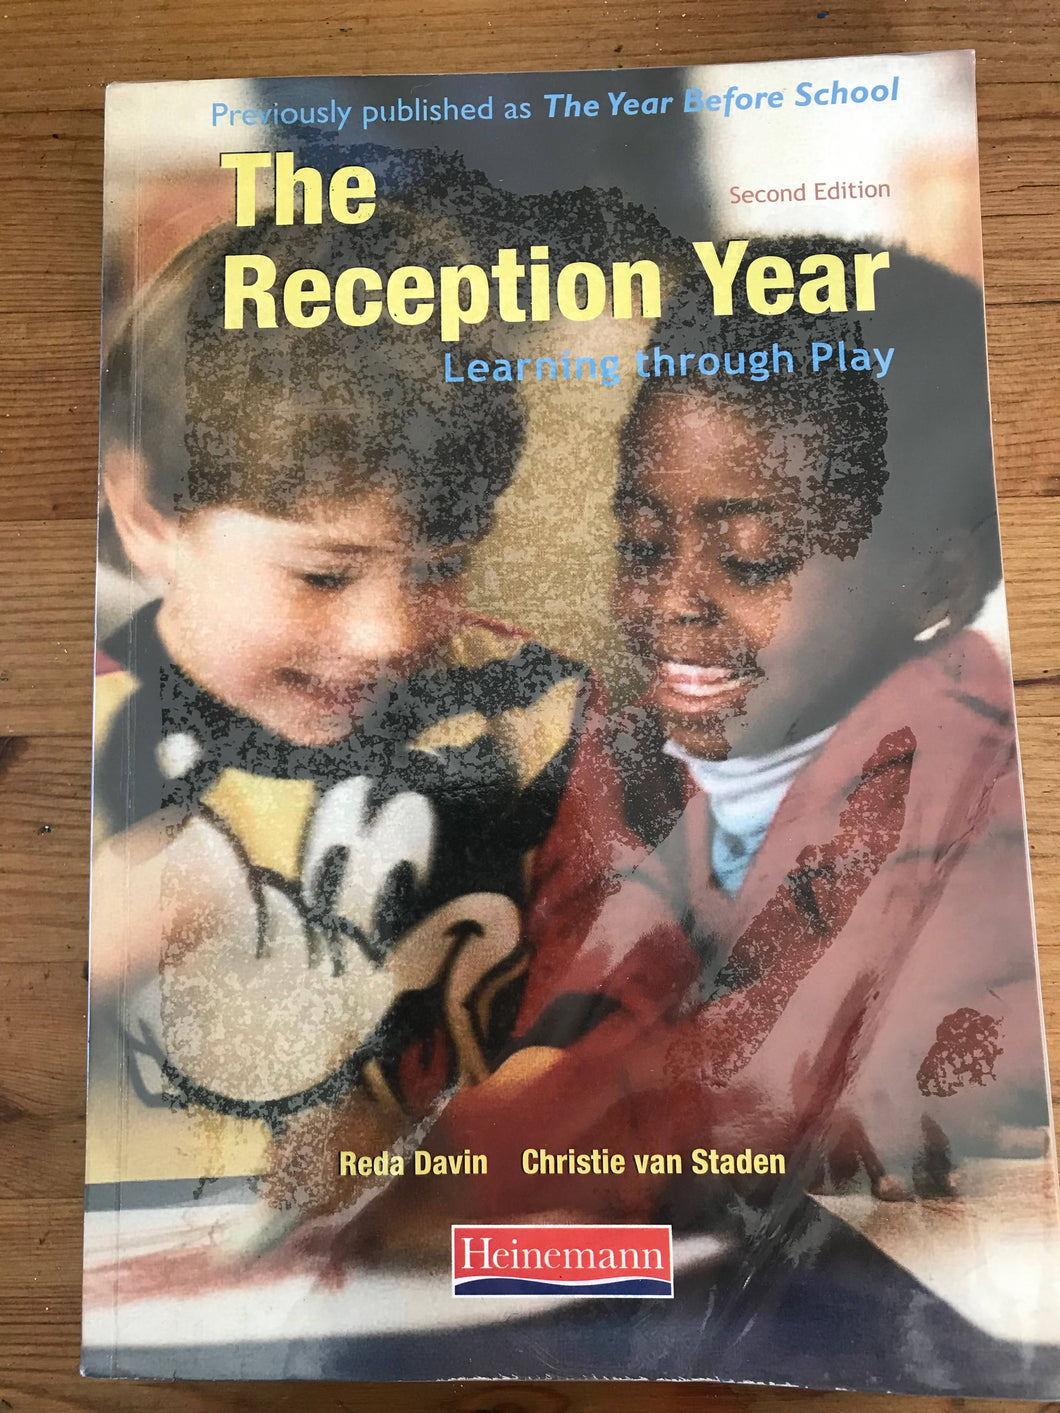 The Reception Year, Learning through play